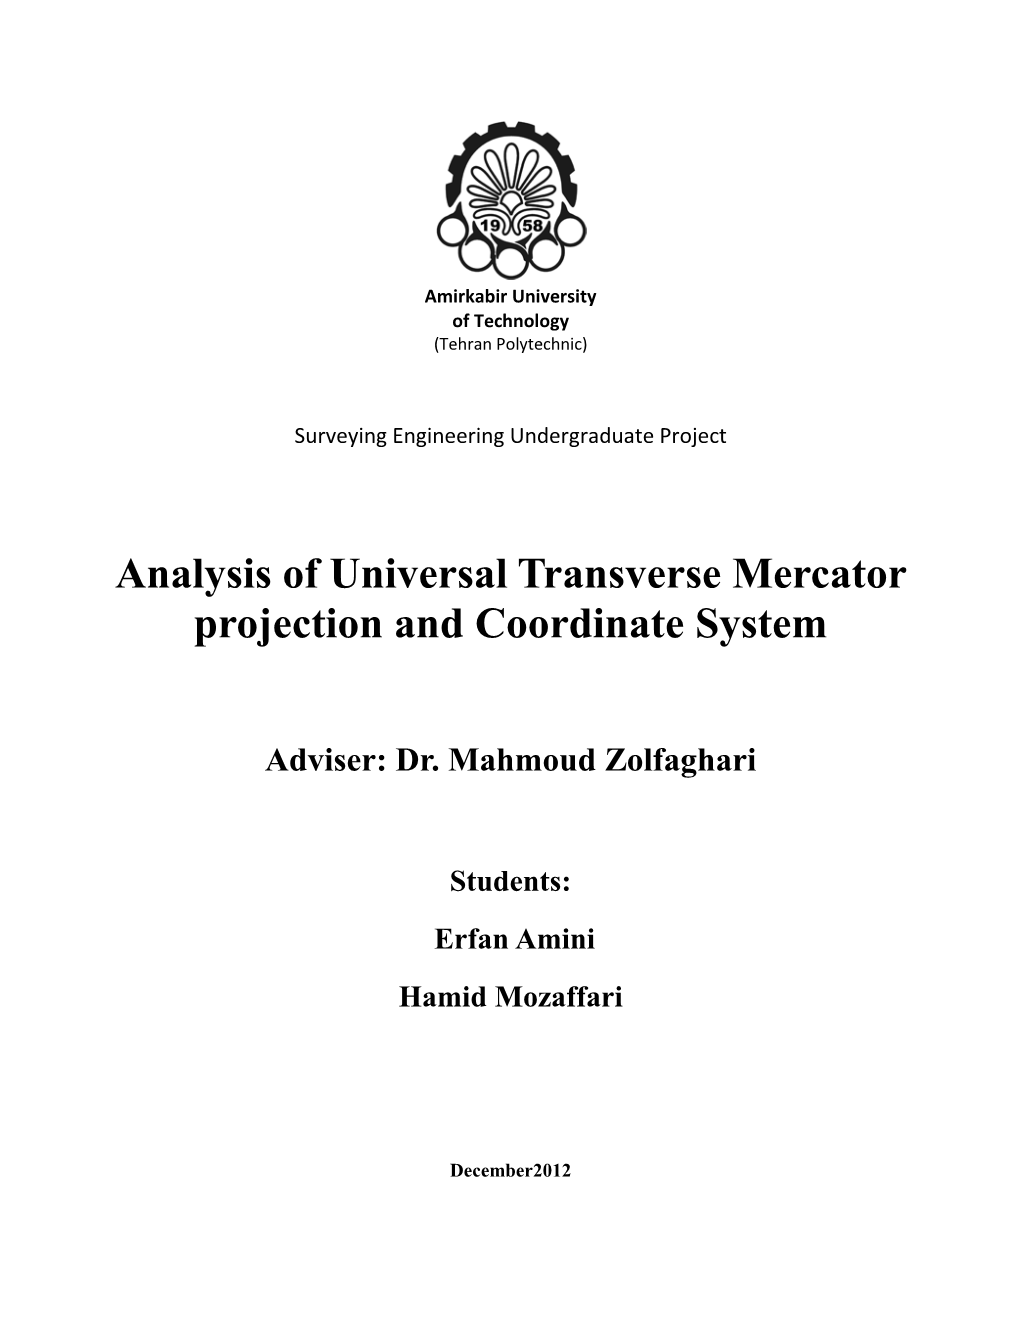 Analysis of Universal Transverse Mercator Projection and Coordinate System